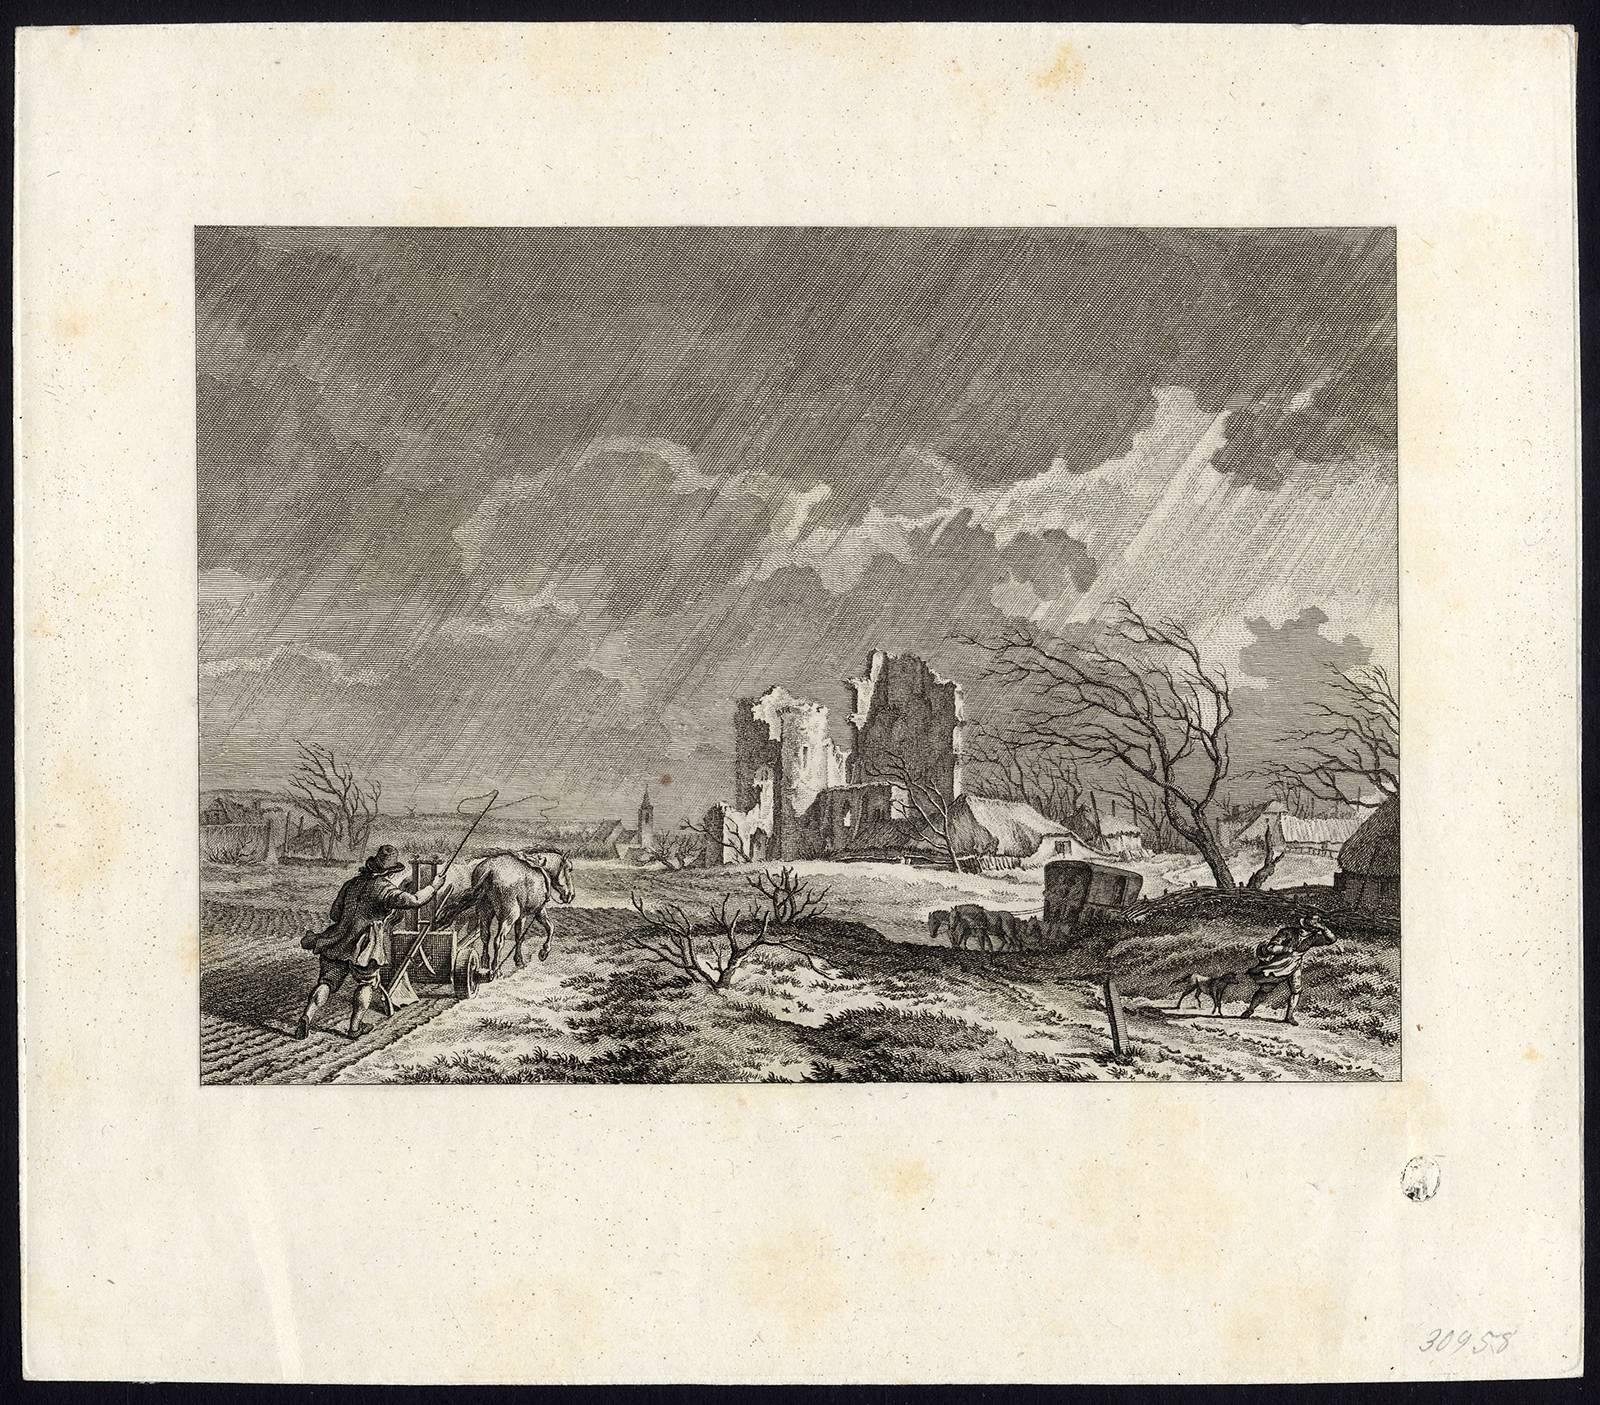 12 Dutch rural village views, each representing a month of the year. Subjects include ice skating, a horse-drawn tug boat (trekschuit), ploughing and harvesting. Set of twelve months, published as such, here as the rare proofs before